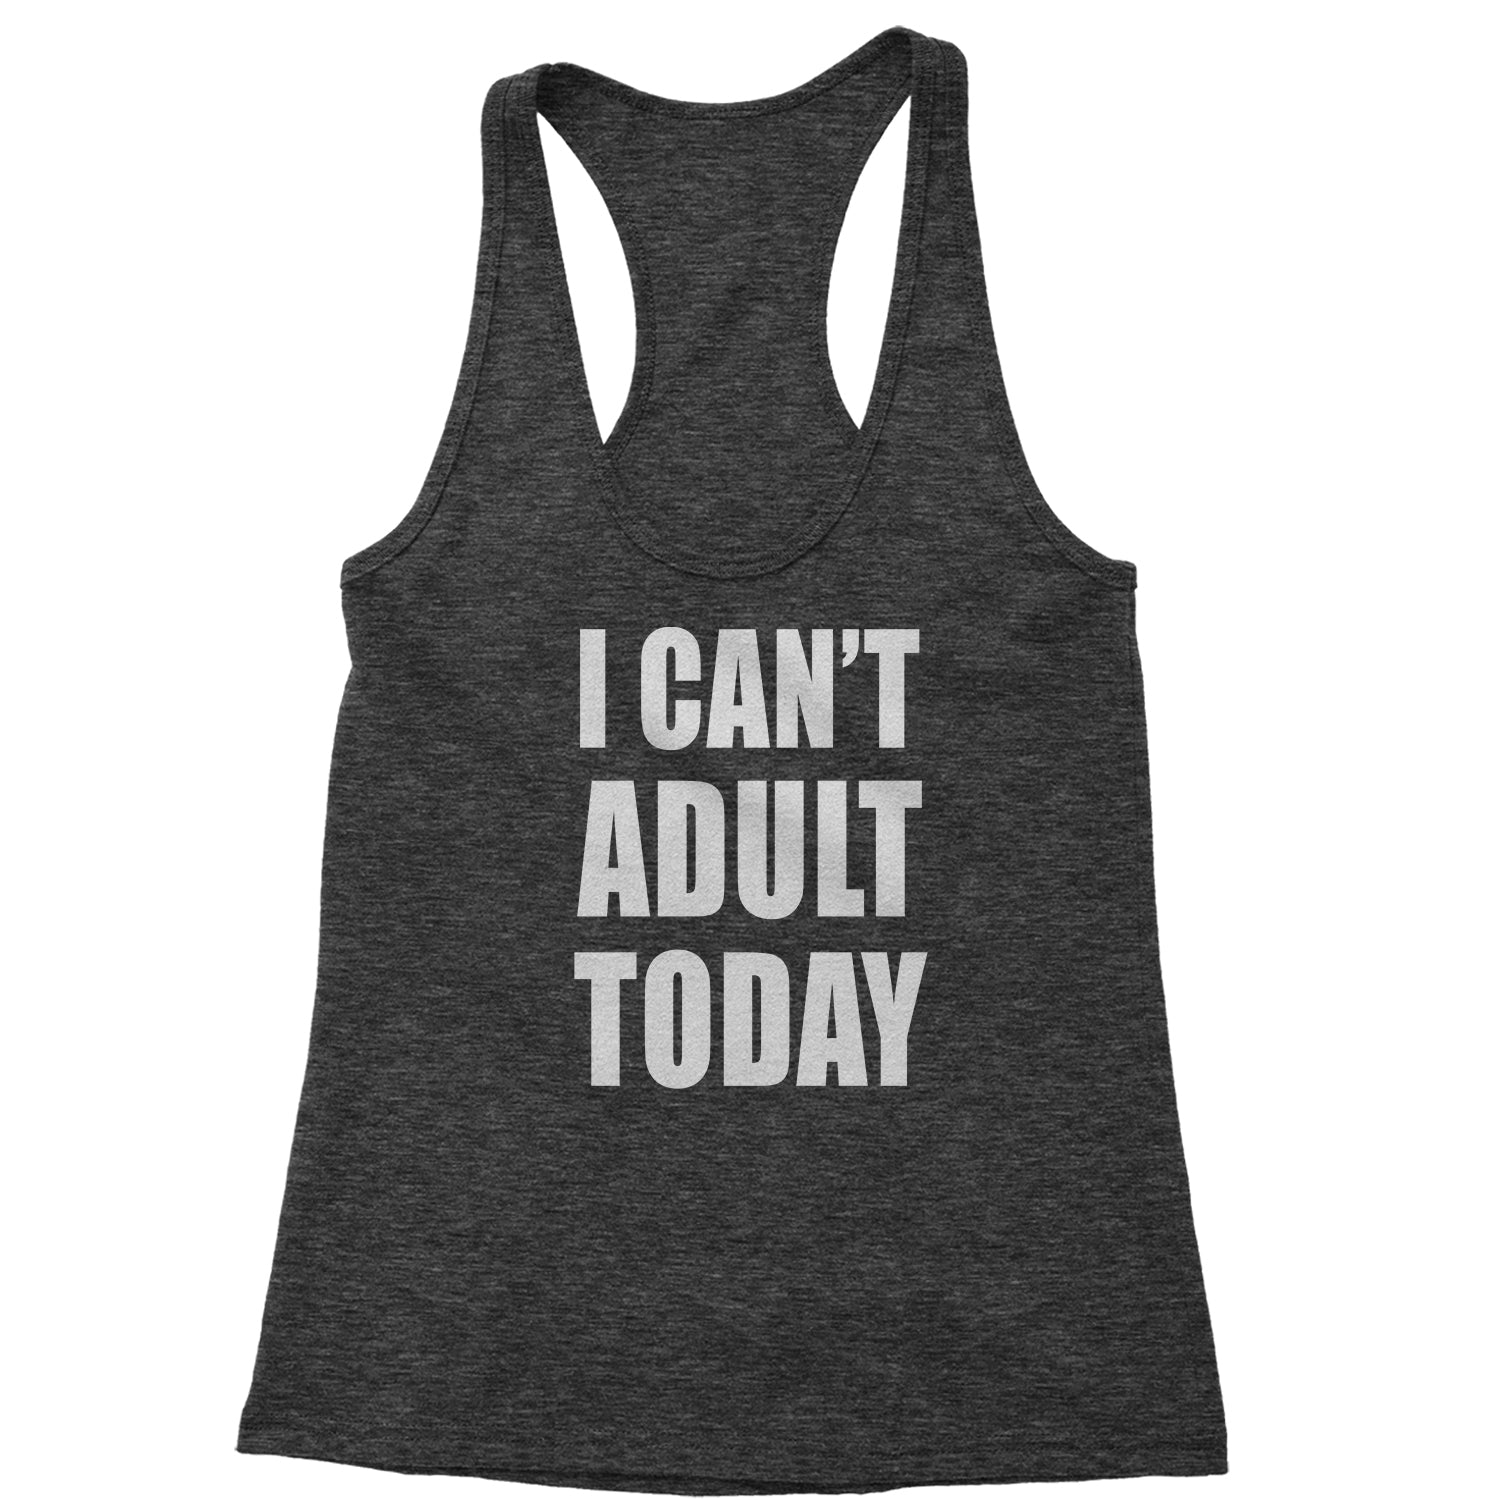 I Can't Adult Today Racerback Tank Top for Women adult, cant, I, today by Expression Tees